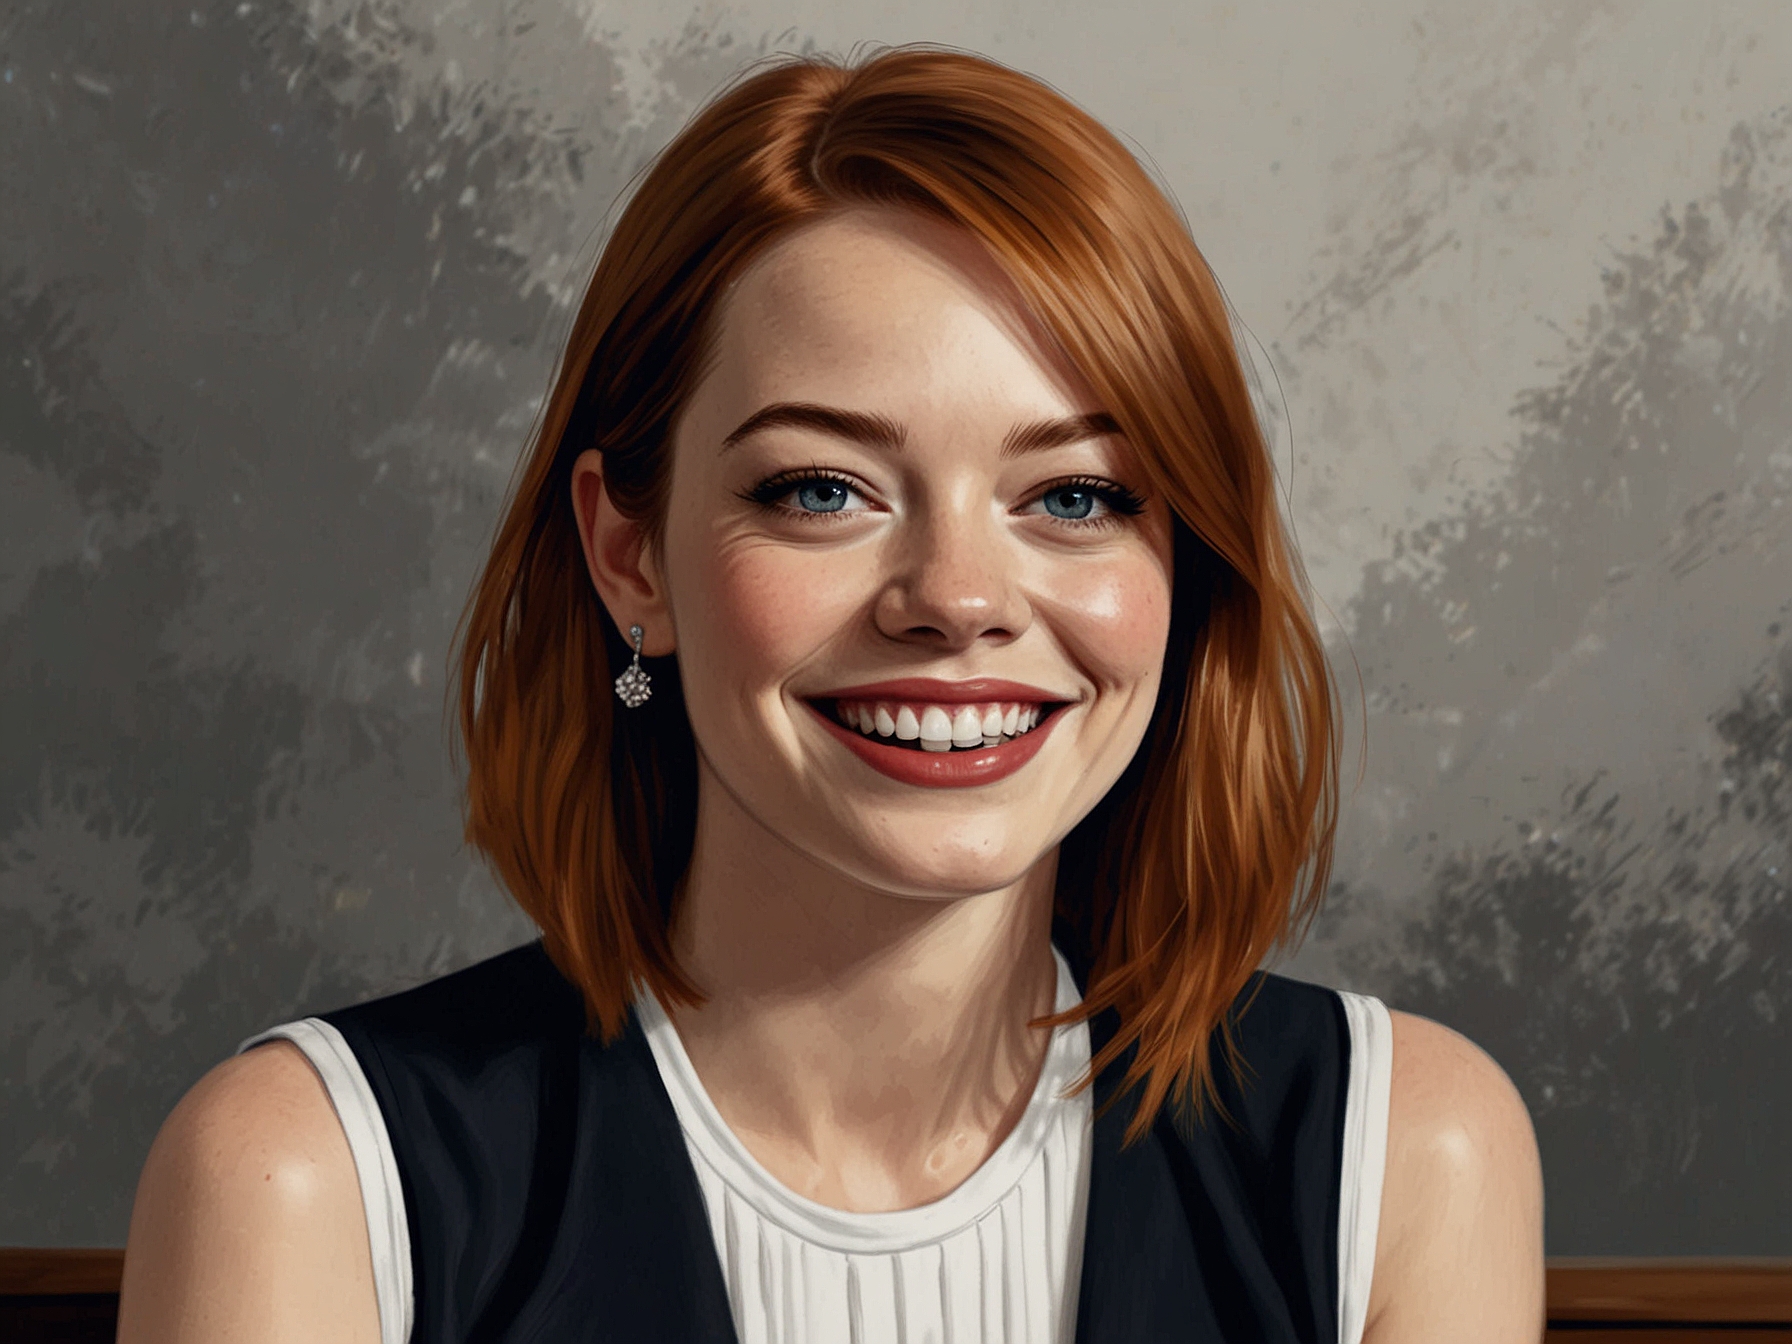 Emma Stone smiling during her TODAY interview where she discusses her dual identity, reflecting her adaptable and relatable nature.